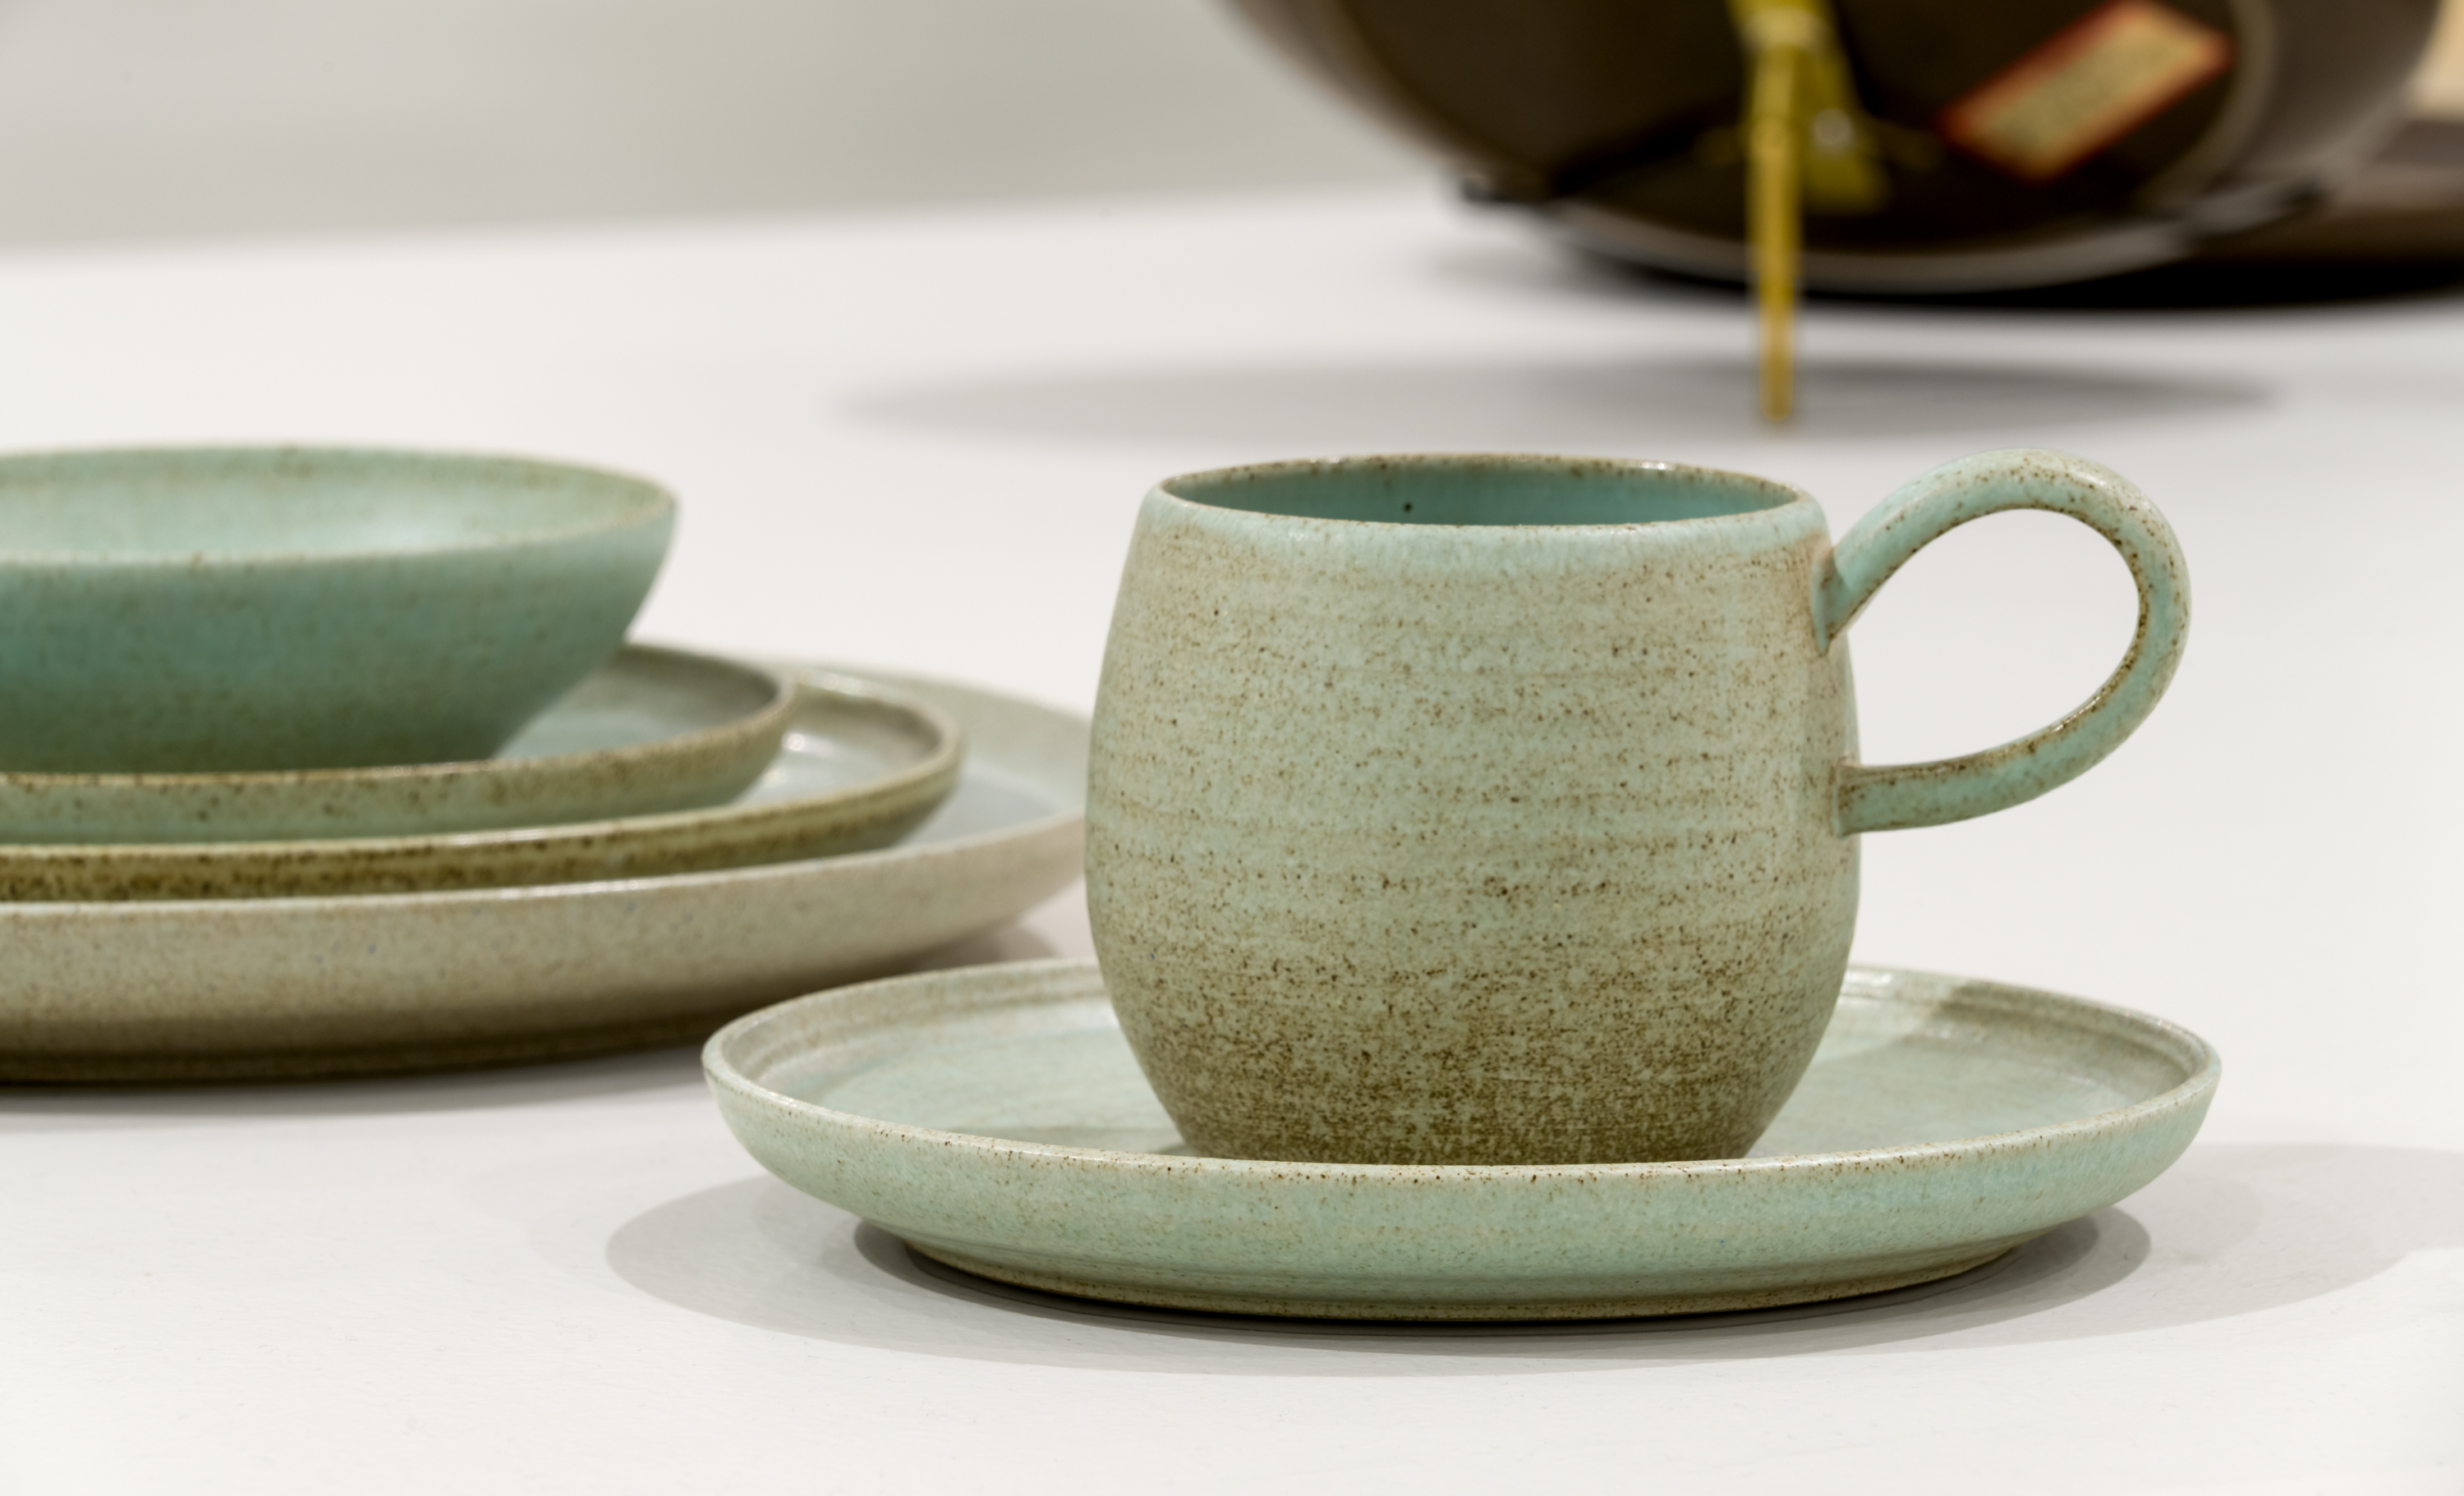 Photograph of a ceramic mug and plate set in pale green with brown specks.